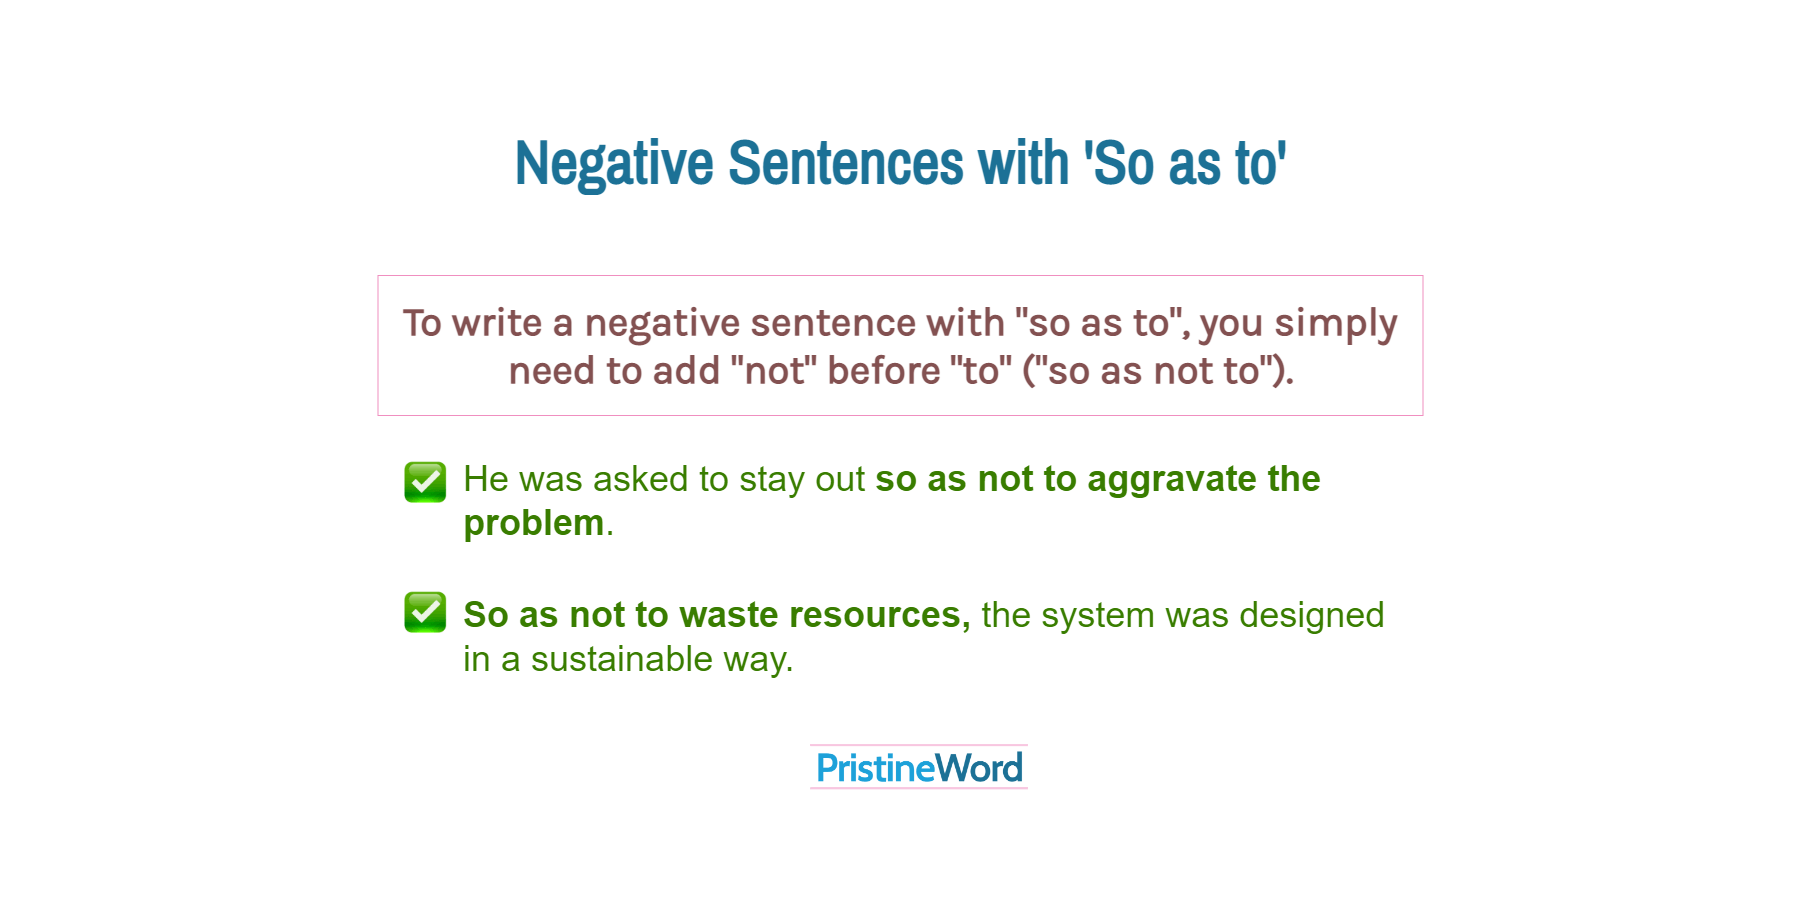 Negative Sentences with 'So as to'